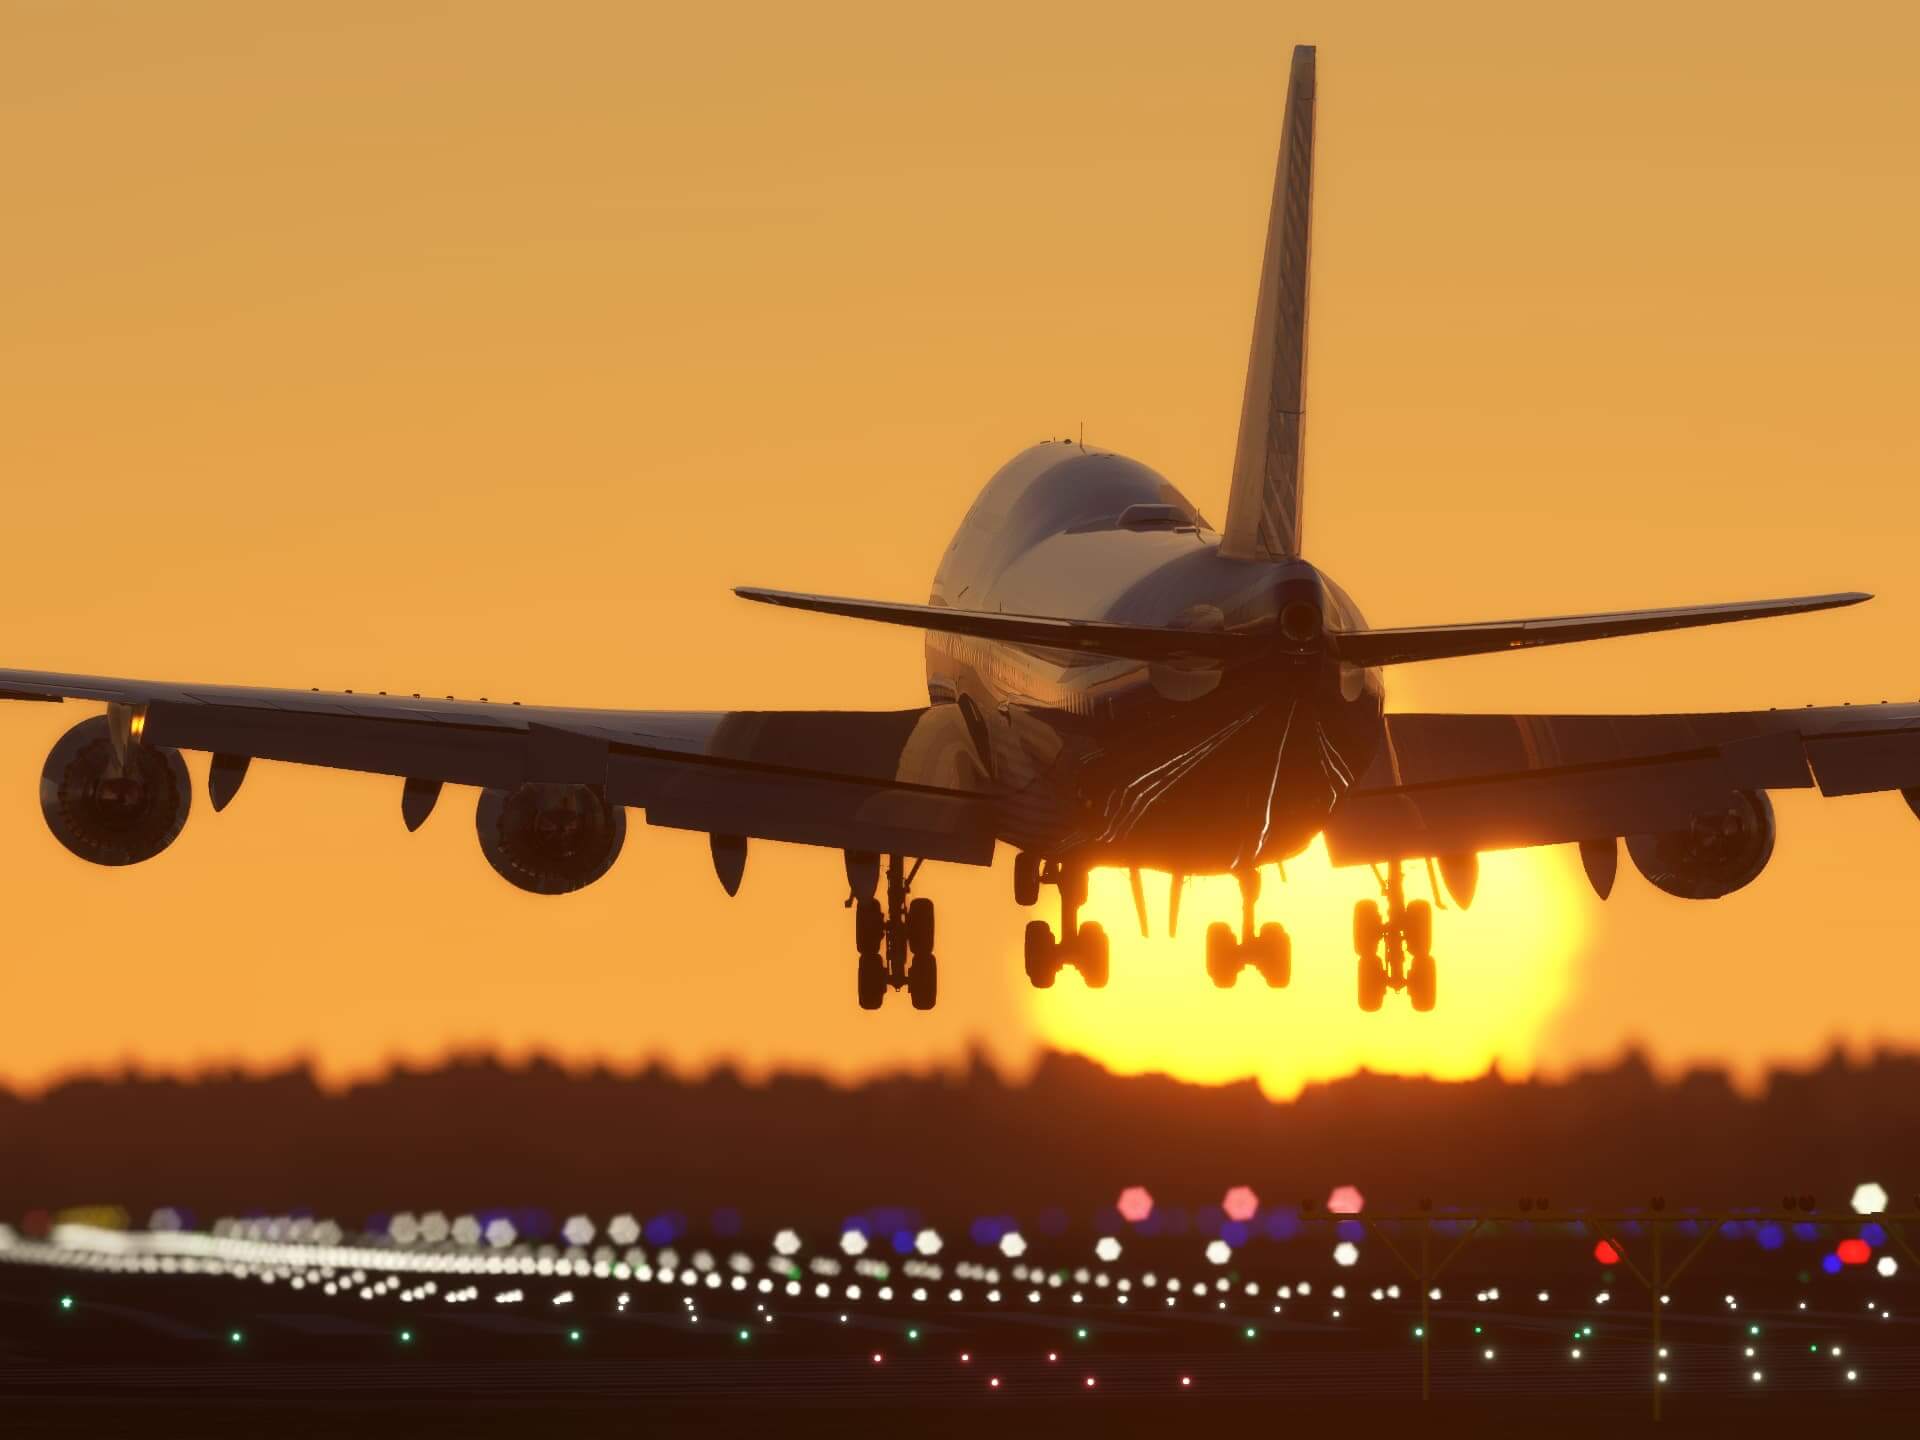 A Boeing 747-8 moments from touchdown on a runway